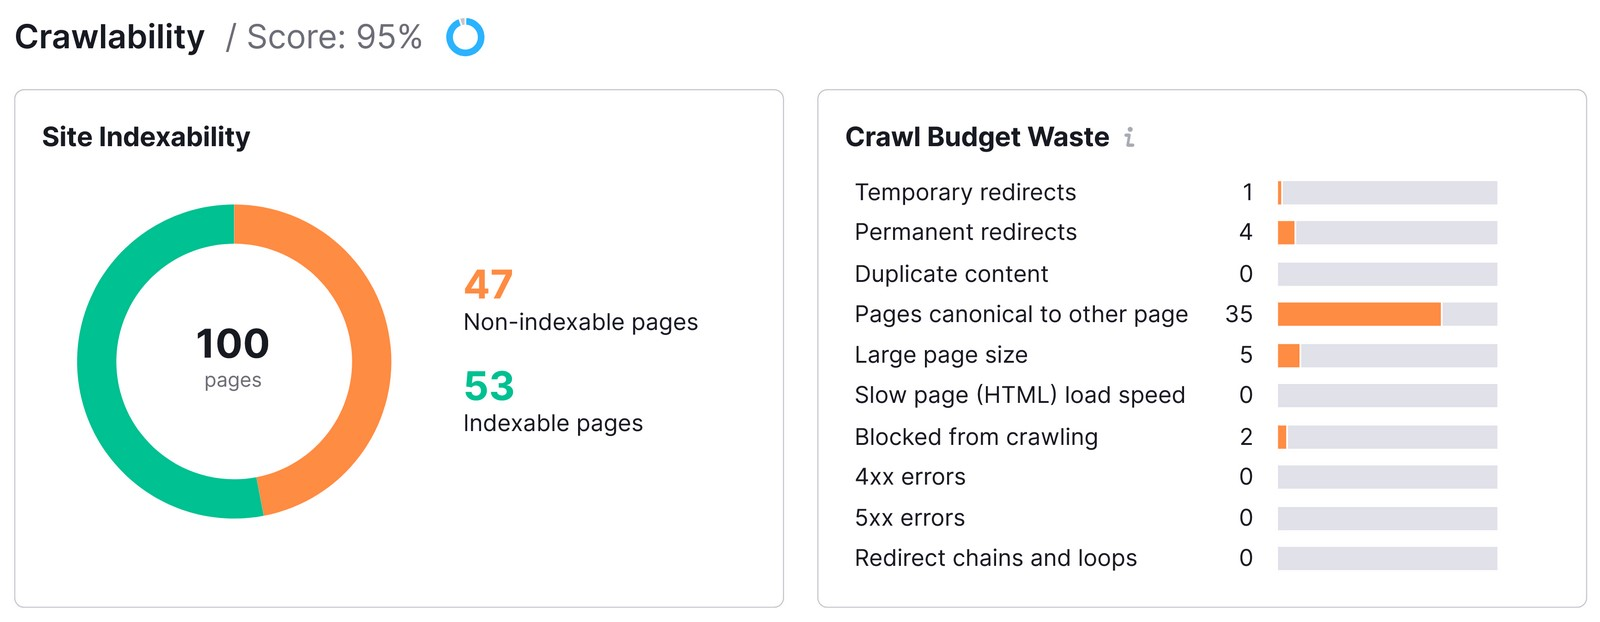 "crawlability" section shoes issues that could prevent Google from accessing the site